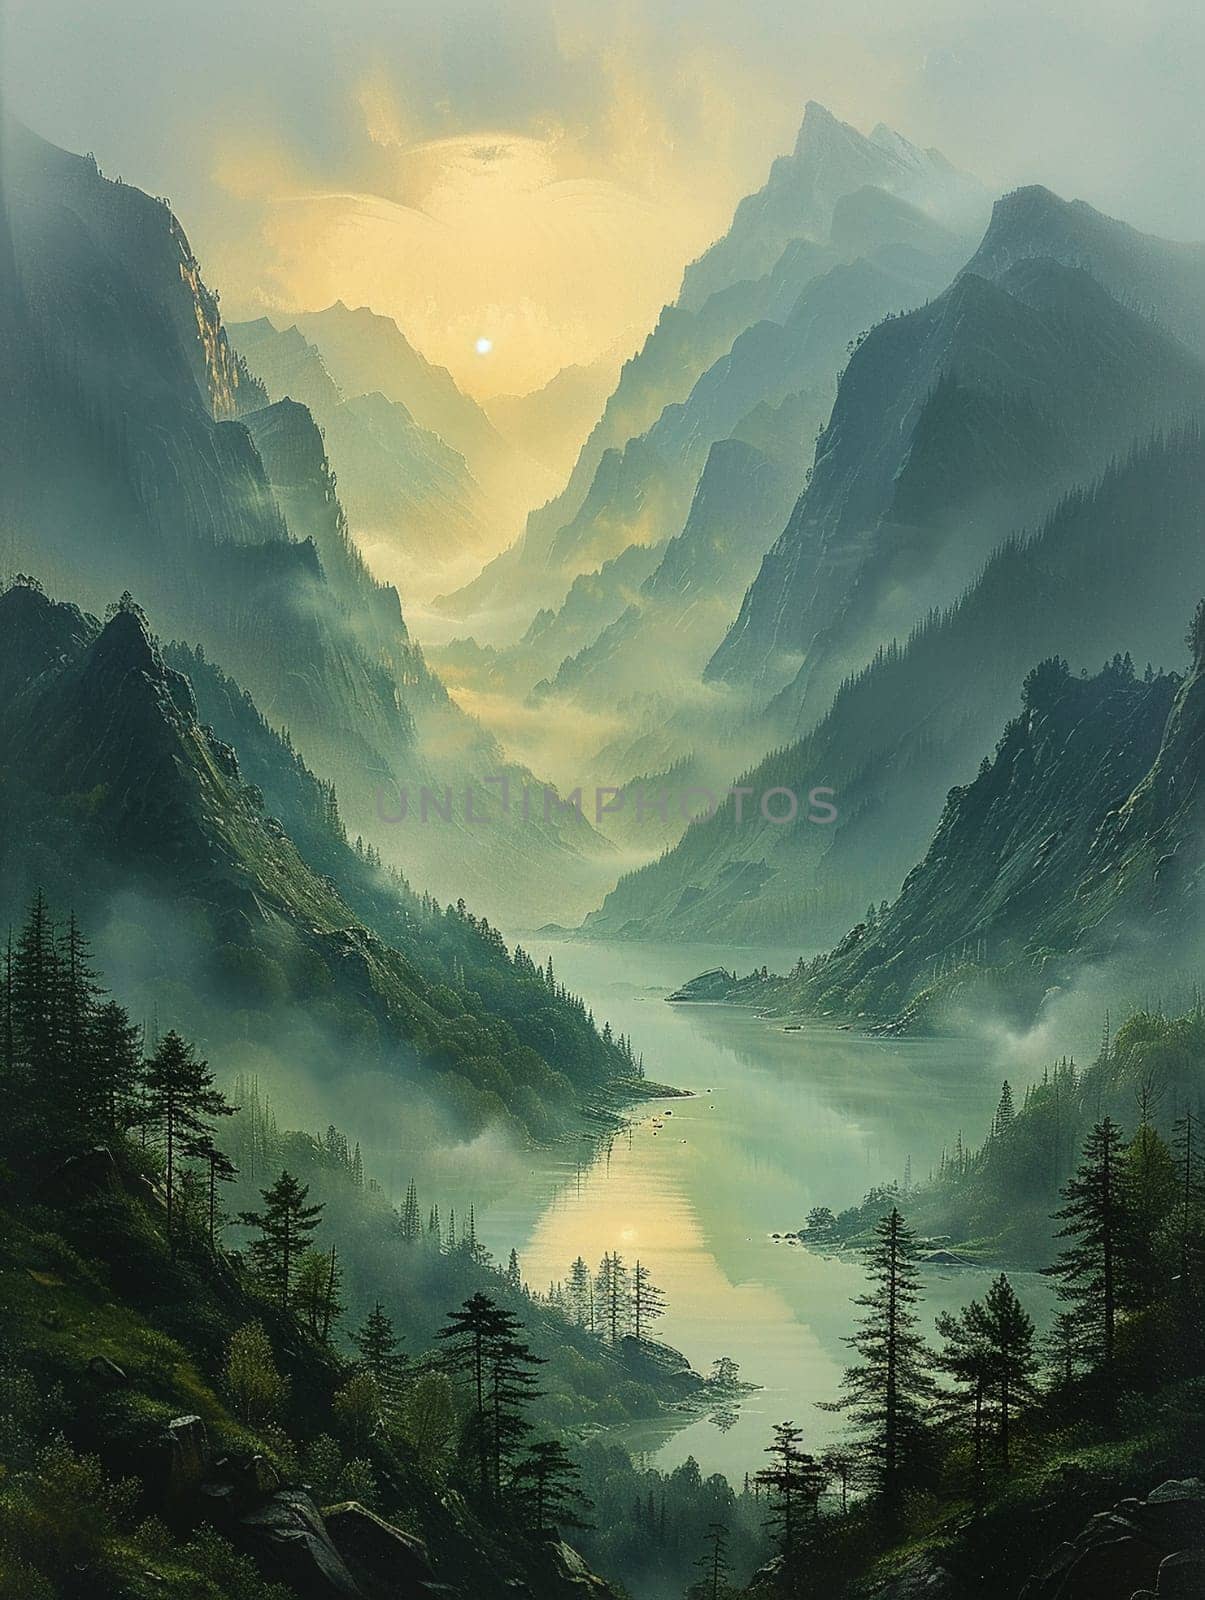 A peaceful sunrise over a mountain range, bathing the landscape in soft light.